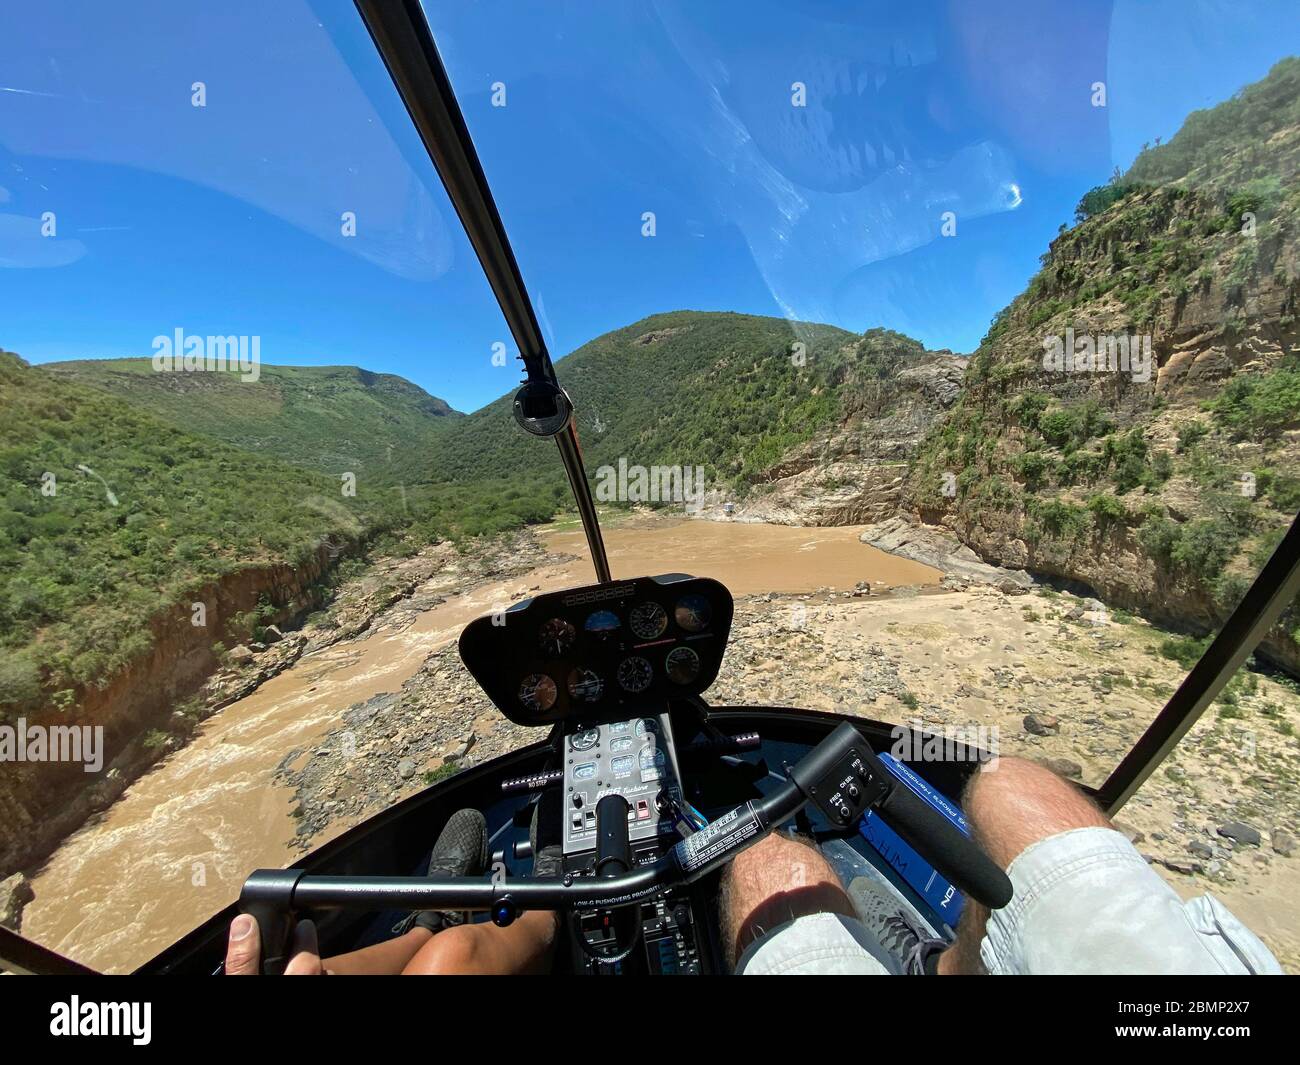 The helicopter pilot is on final approach to a small landing zone next to the waterfall. Here precision flying is required to land safely. Stock Photo